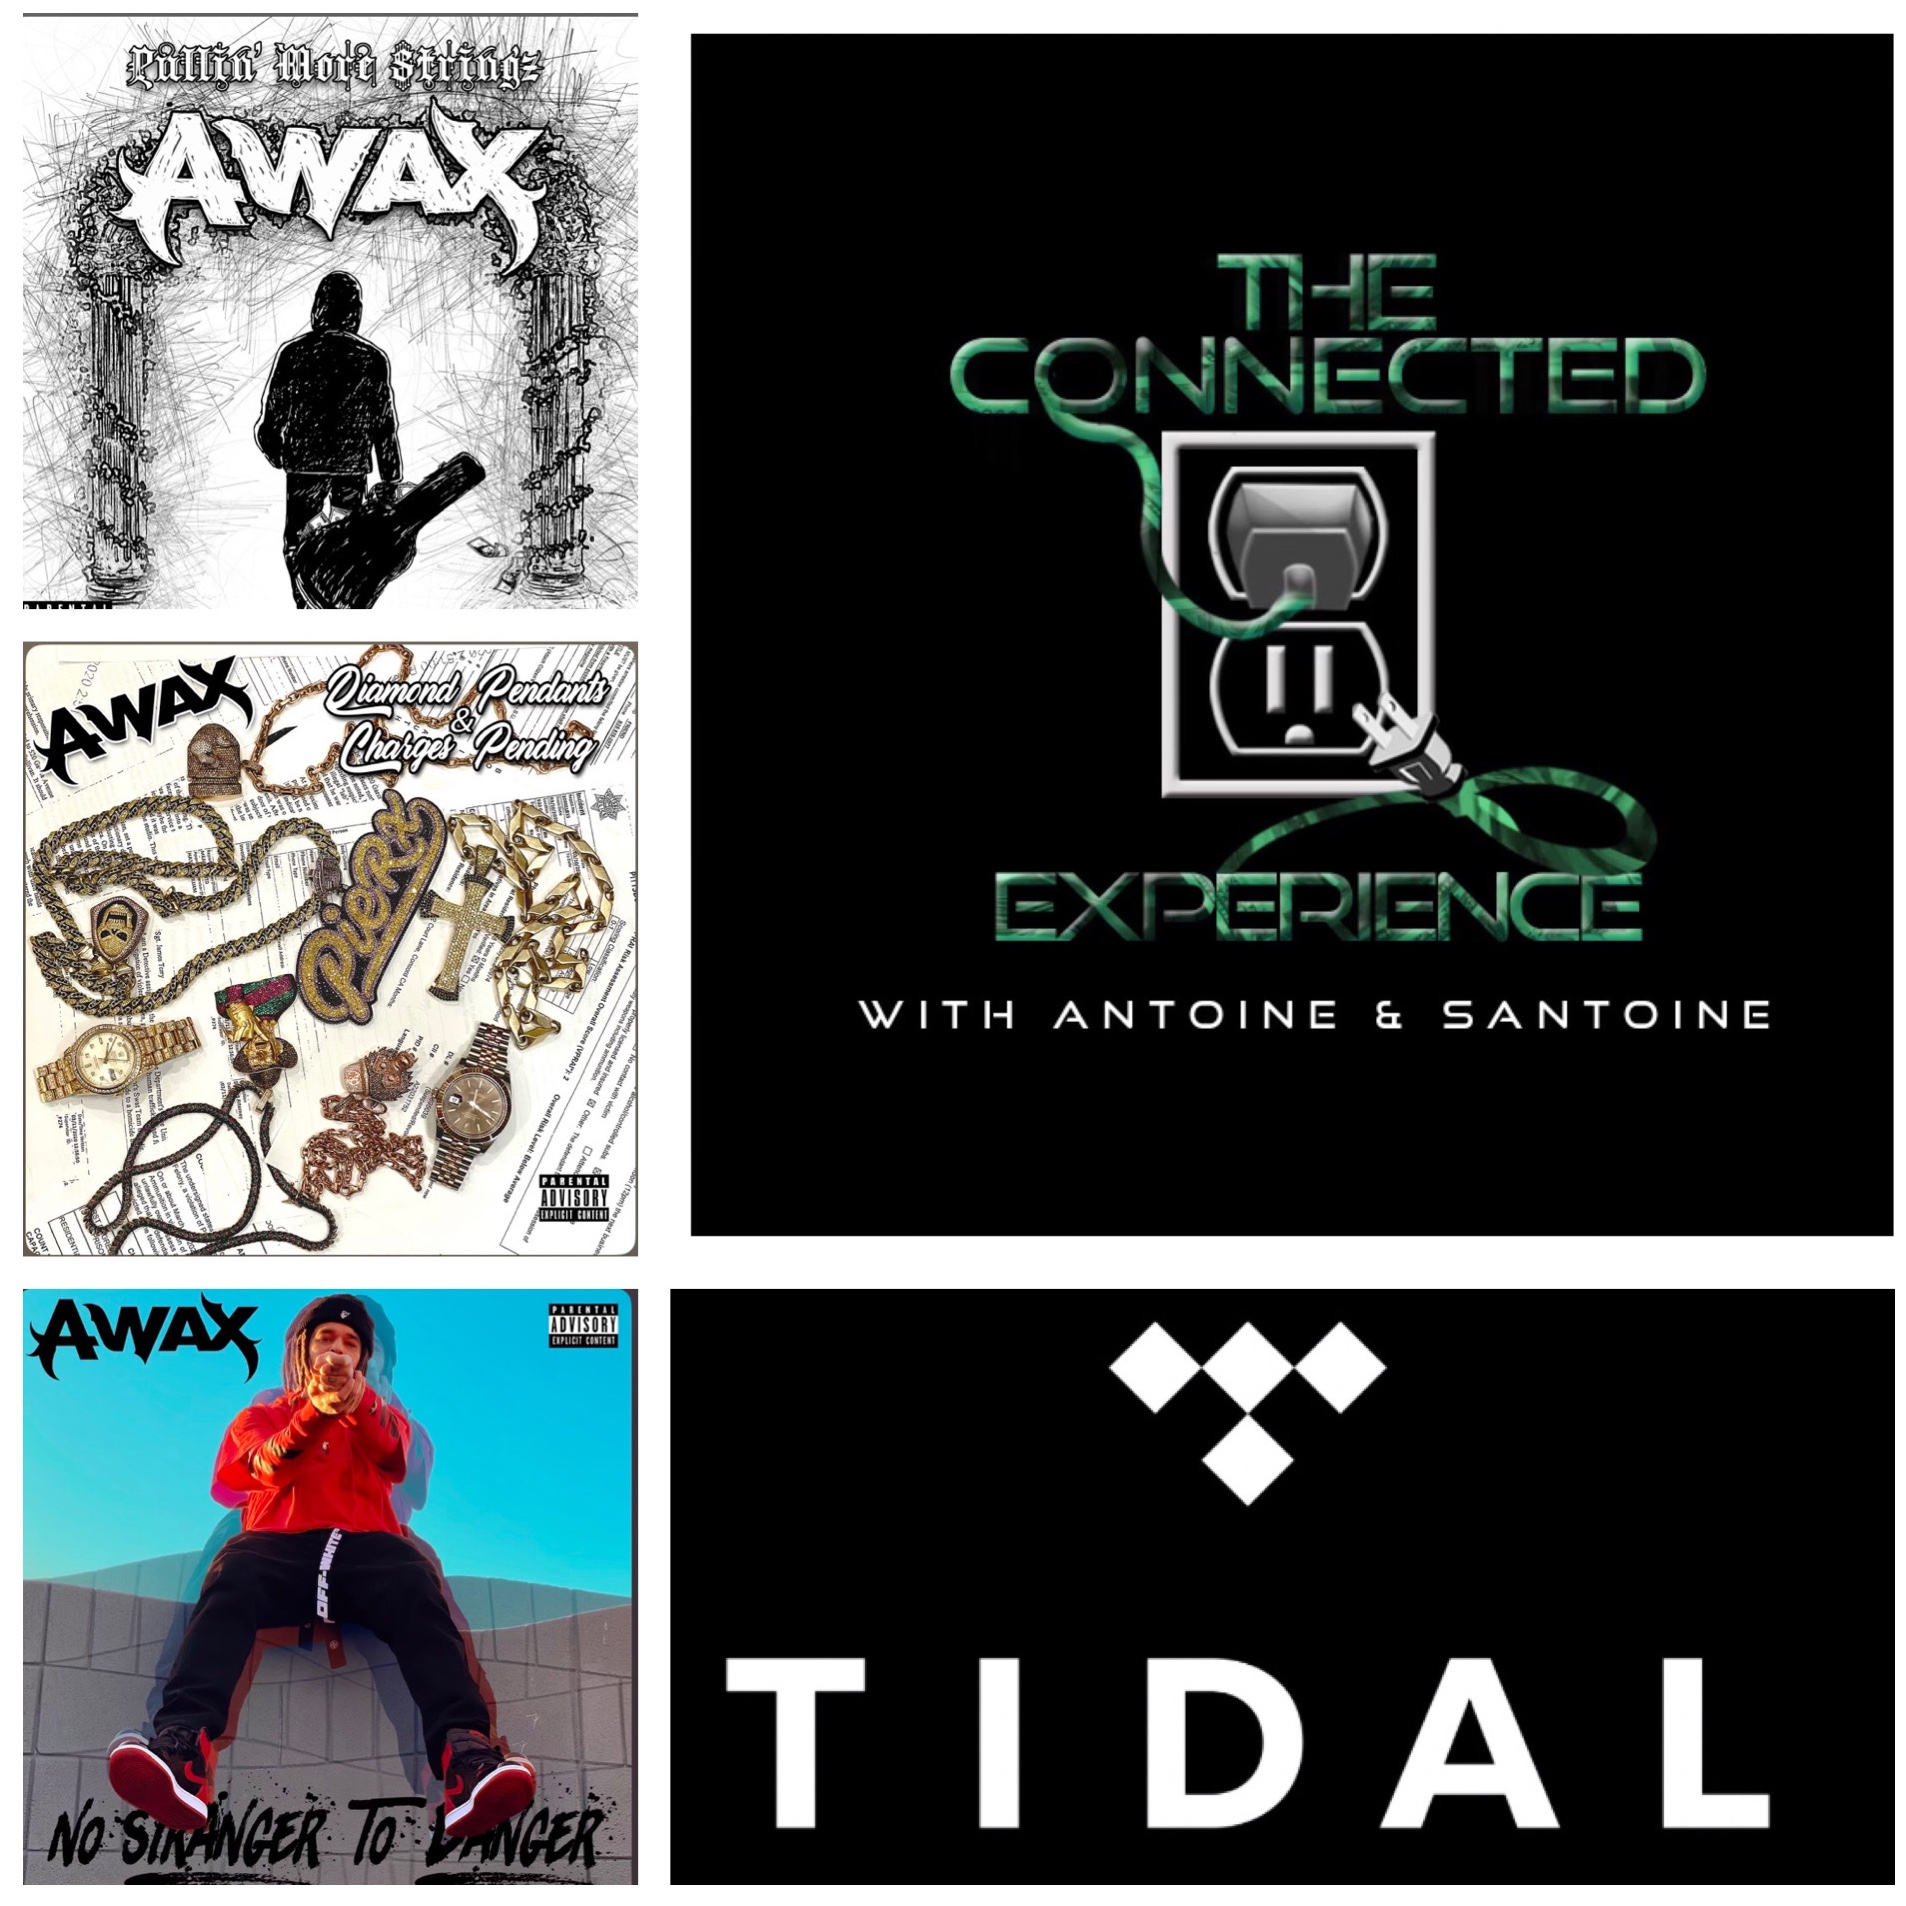 The Connected Experience - What’s In Your Tidal F/ Music By A-Wax